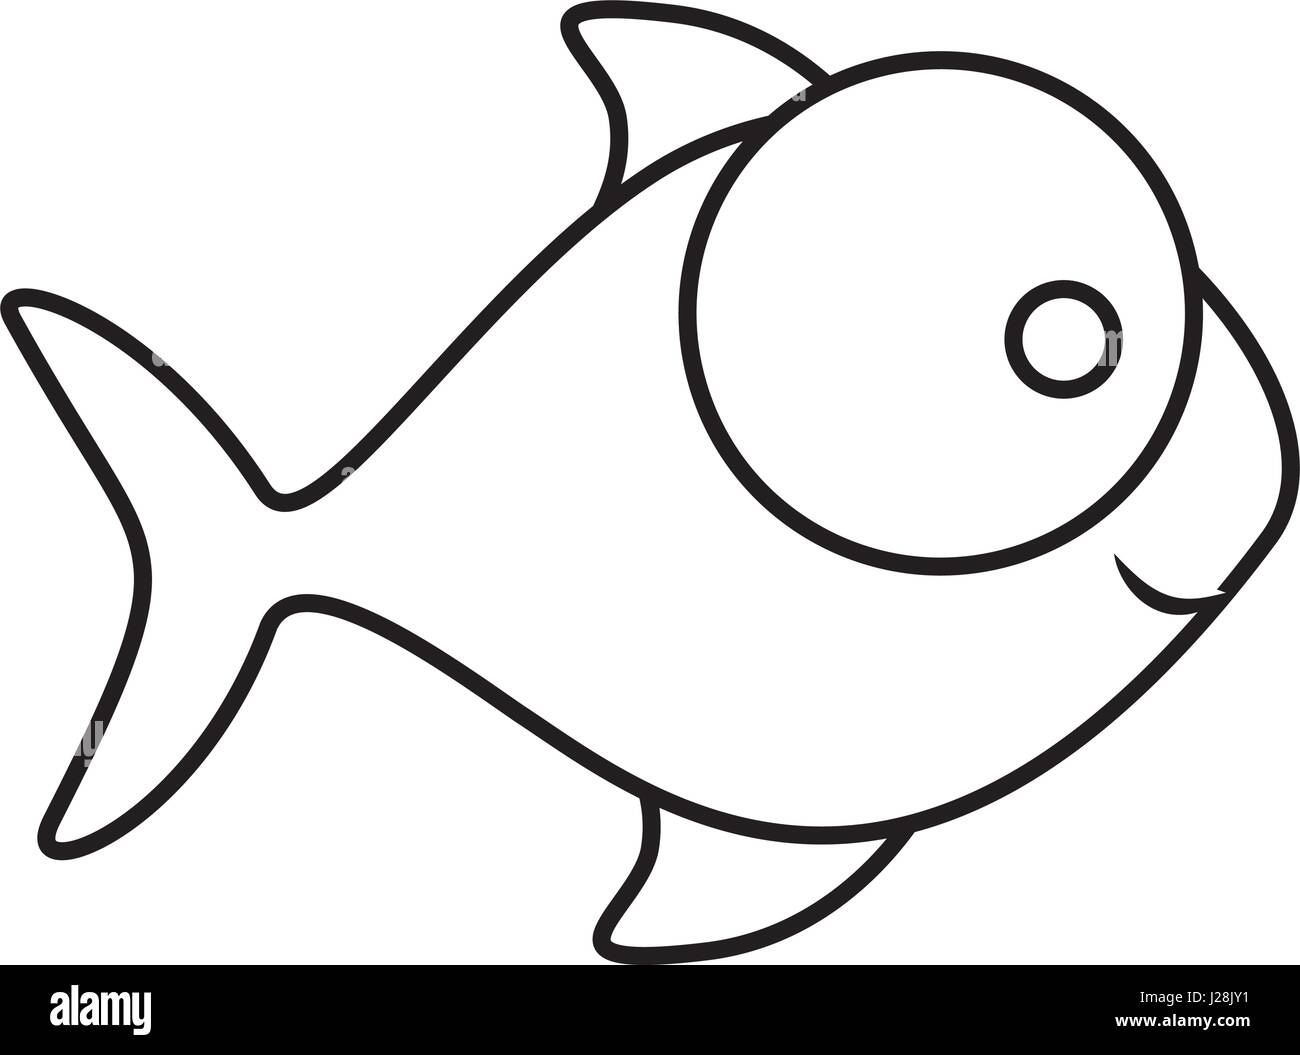 monochrome silhouette of fish with big eye and small pupil Stock Vector